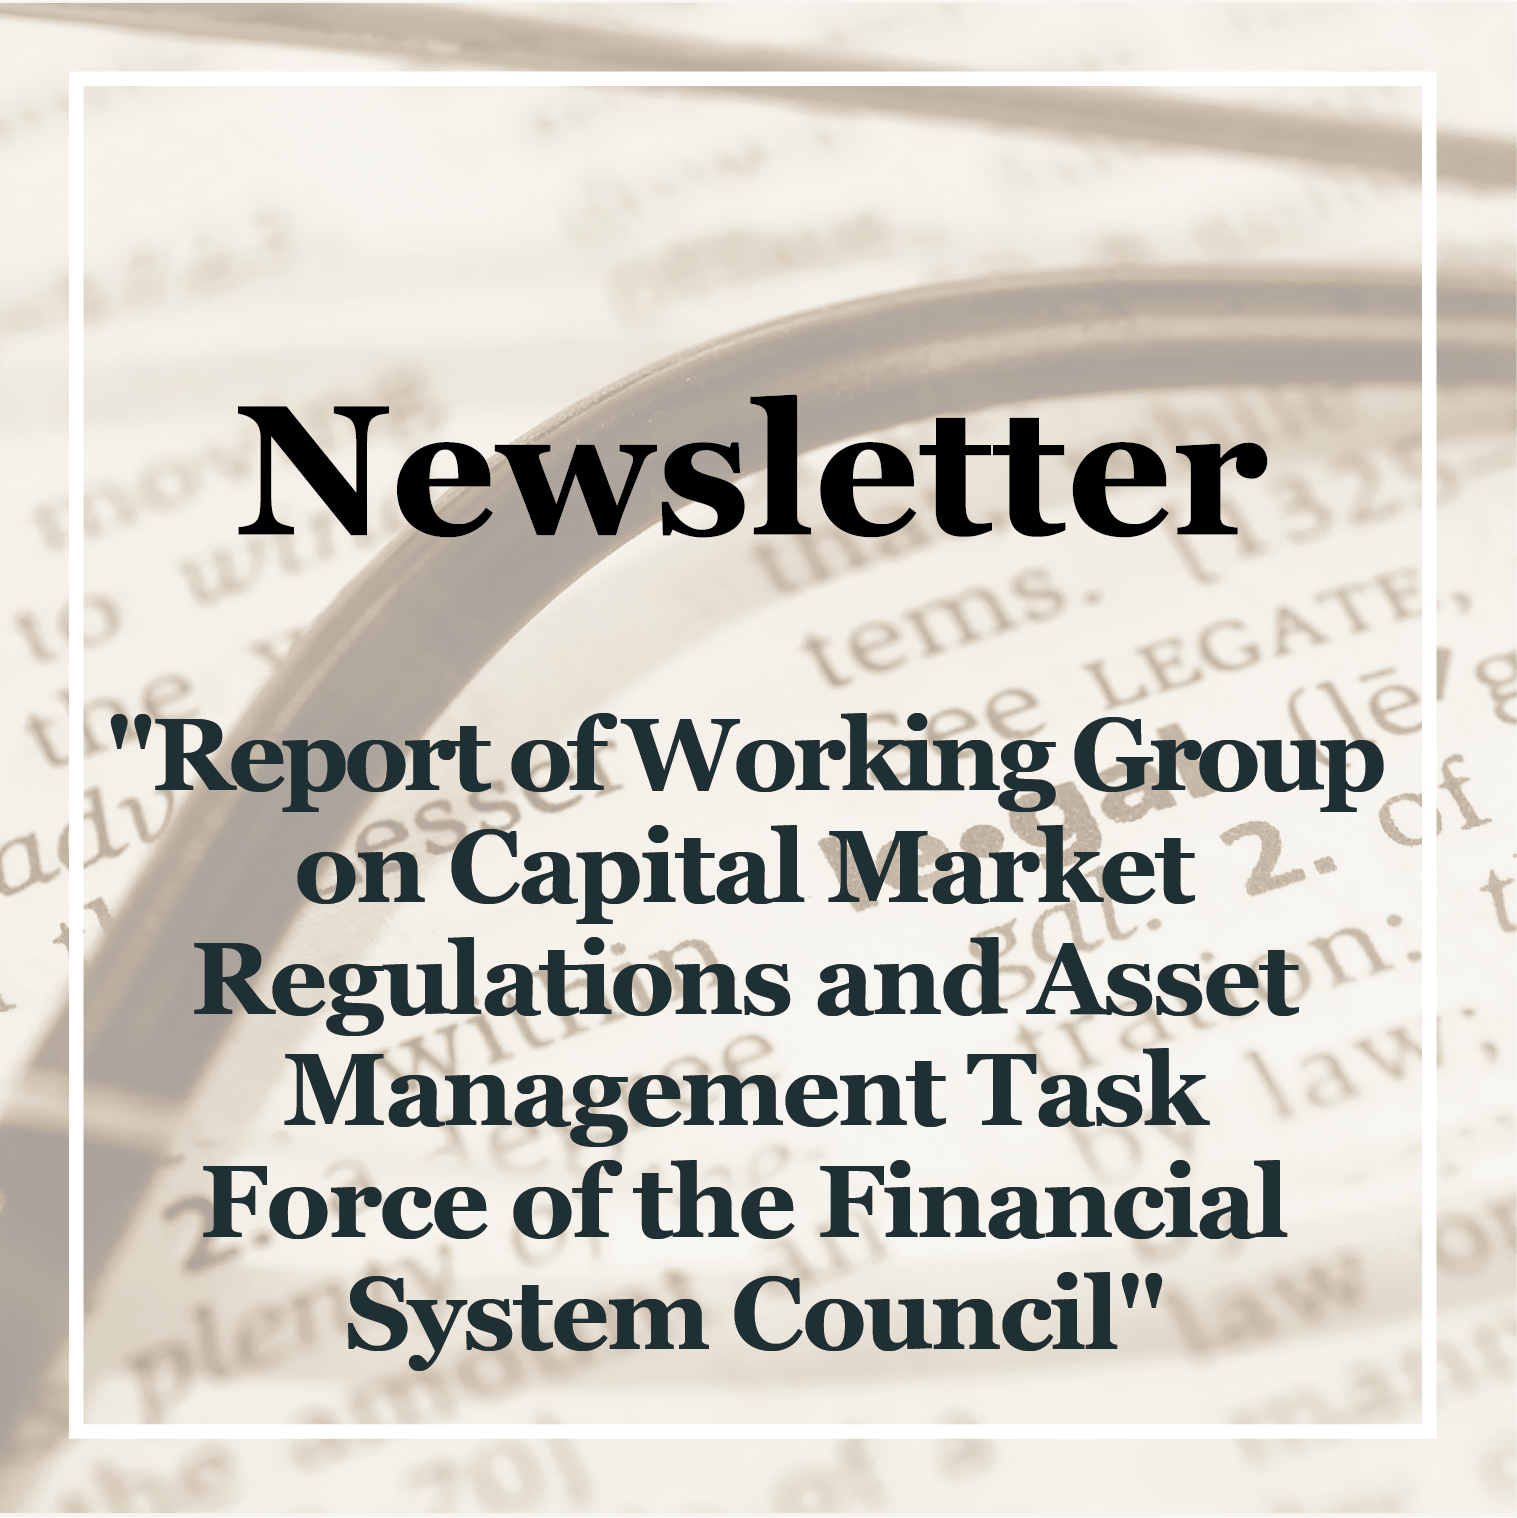 [Newsletter] Policy Research Institute: "Report of Working Group on Capital Market Regulations and Asset Management Task Force of the Financial System Council"